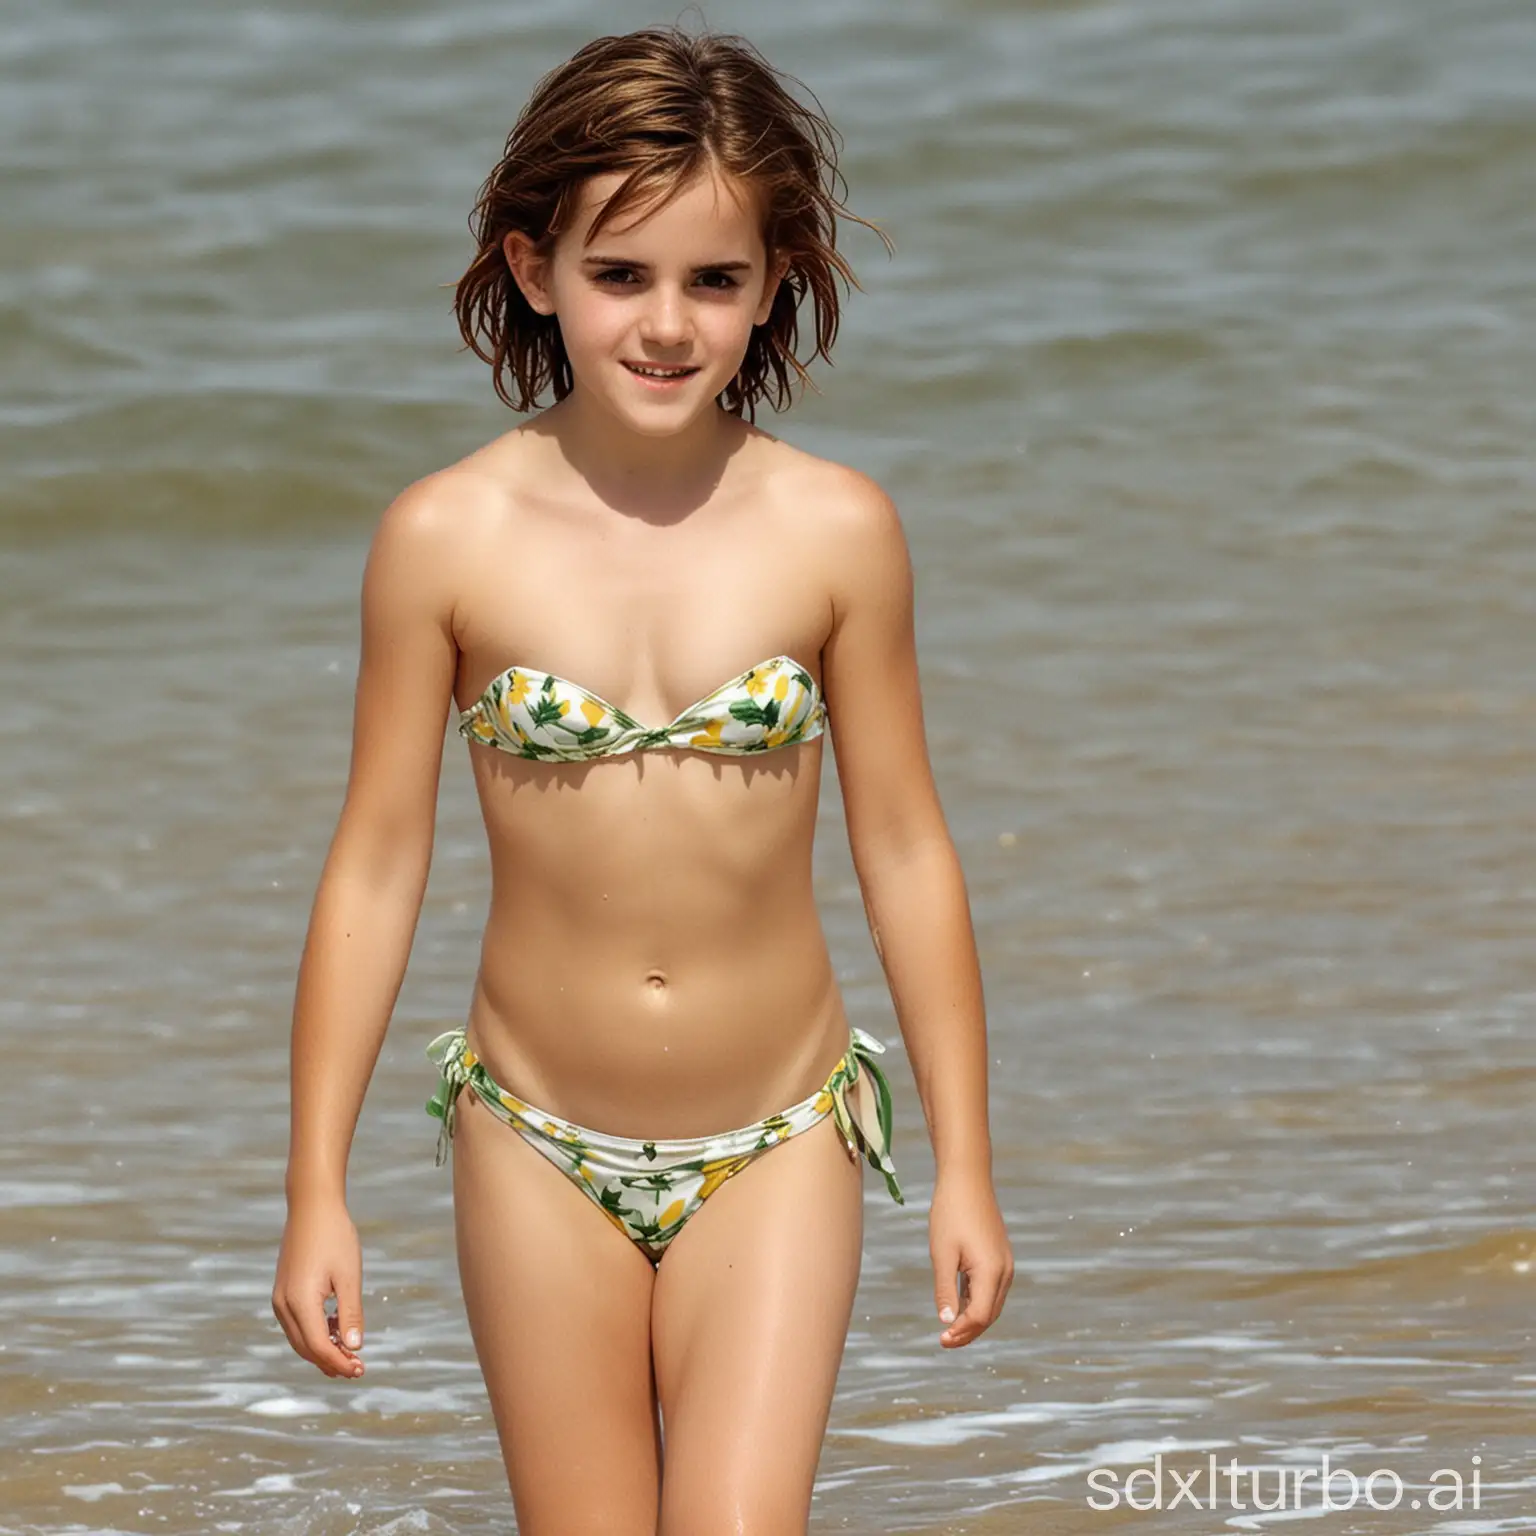 a very young Emma Watson in a very tiny bikini nearly showing everything